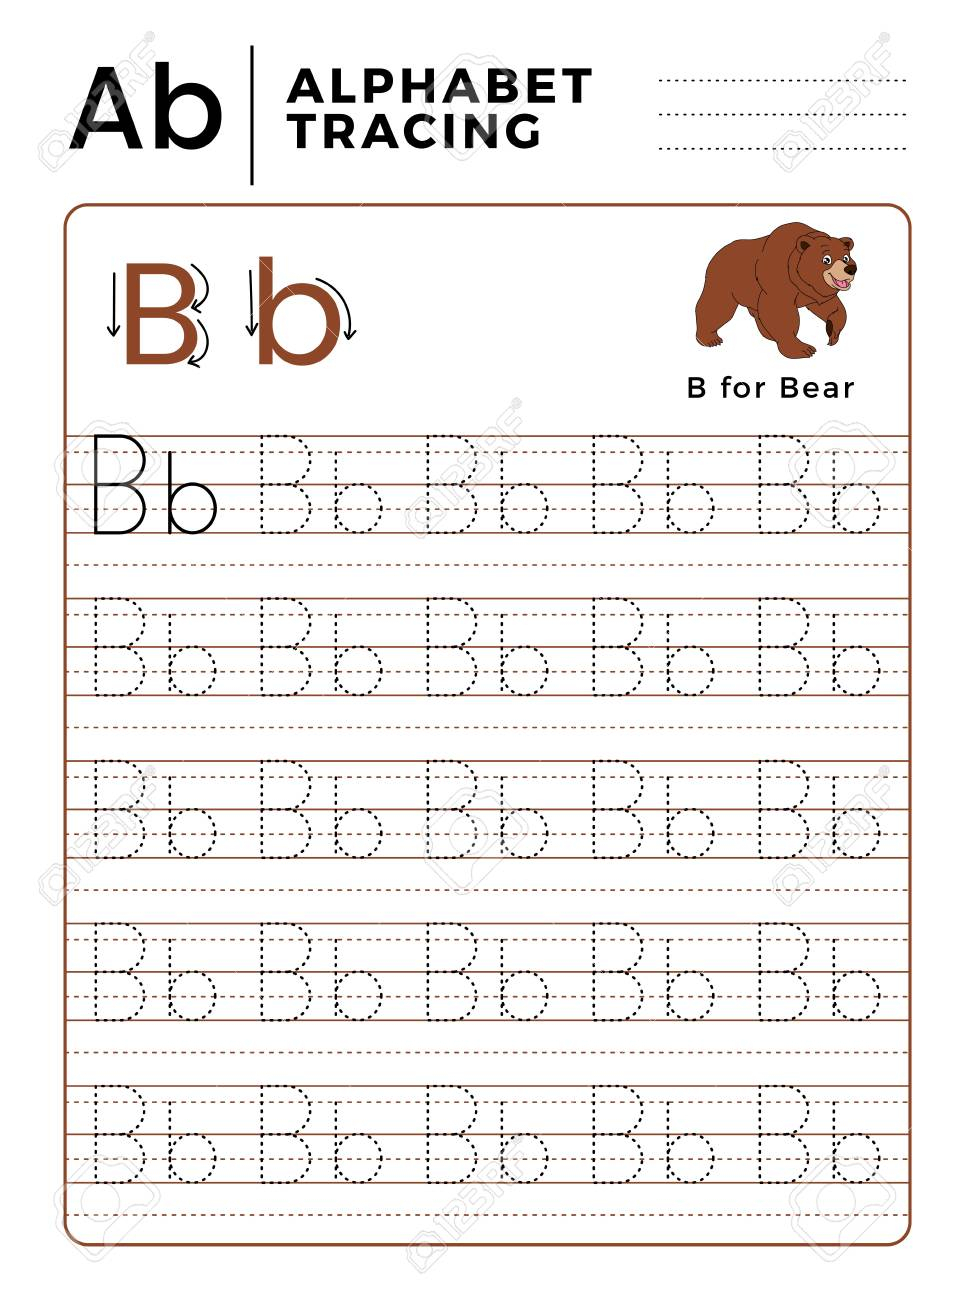 Letter B Alphabet Tracing Book With Example And Funny Bear Cartoon inside Alphabet Tracing Worksheets B